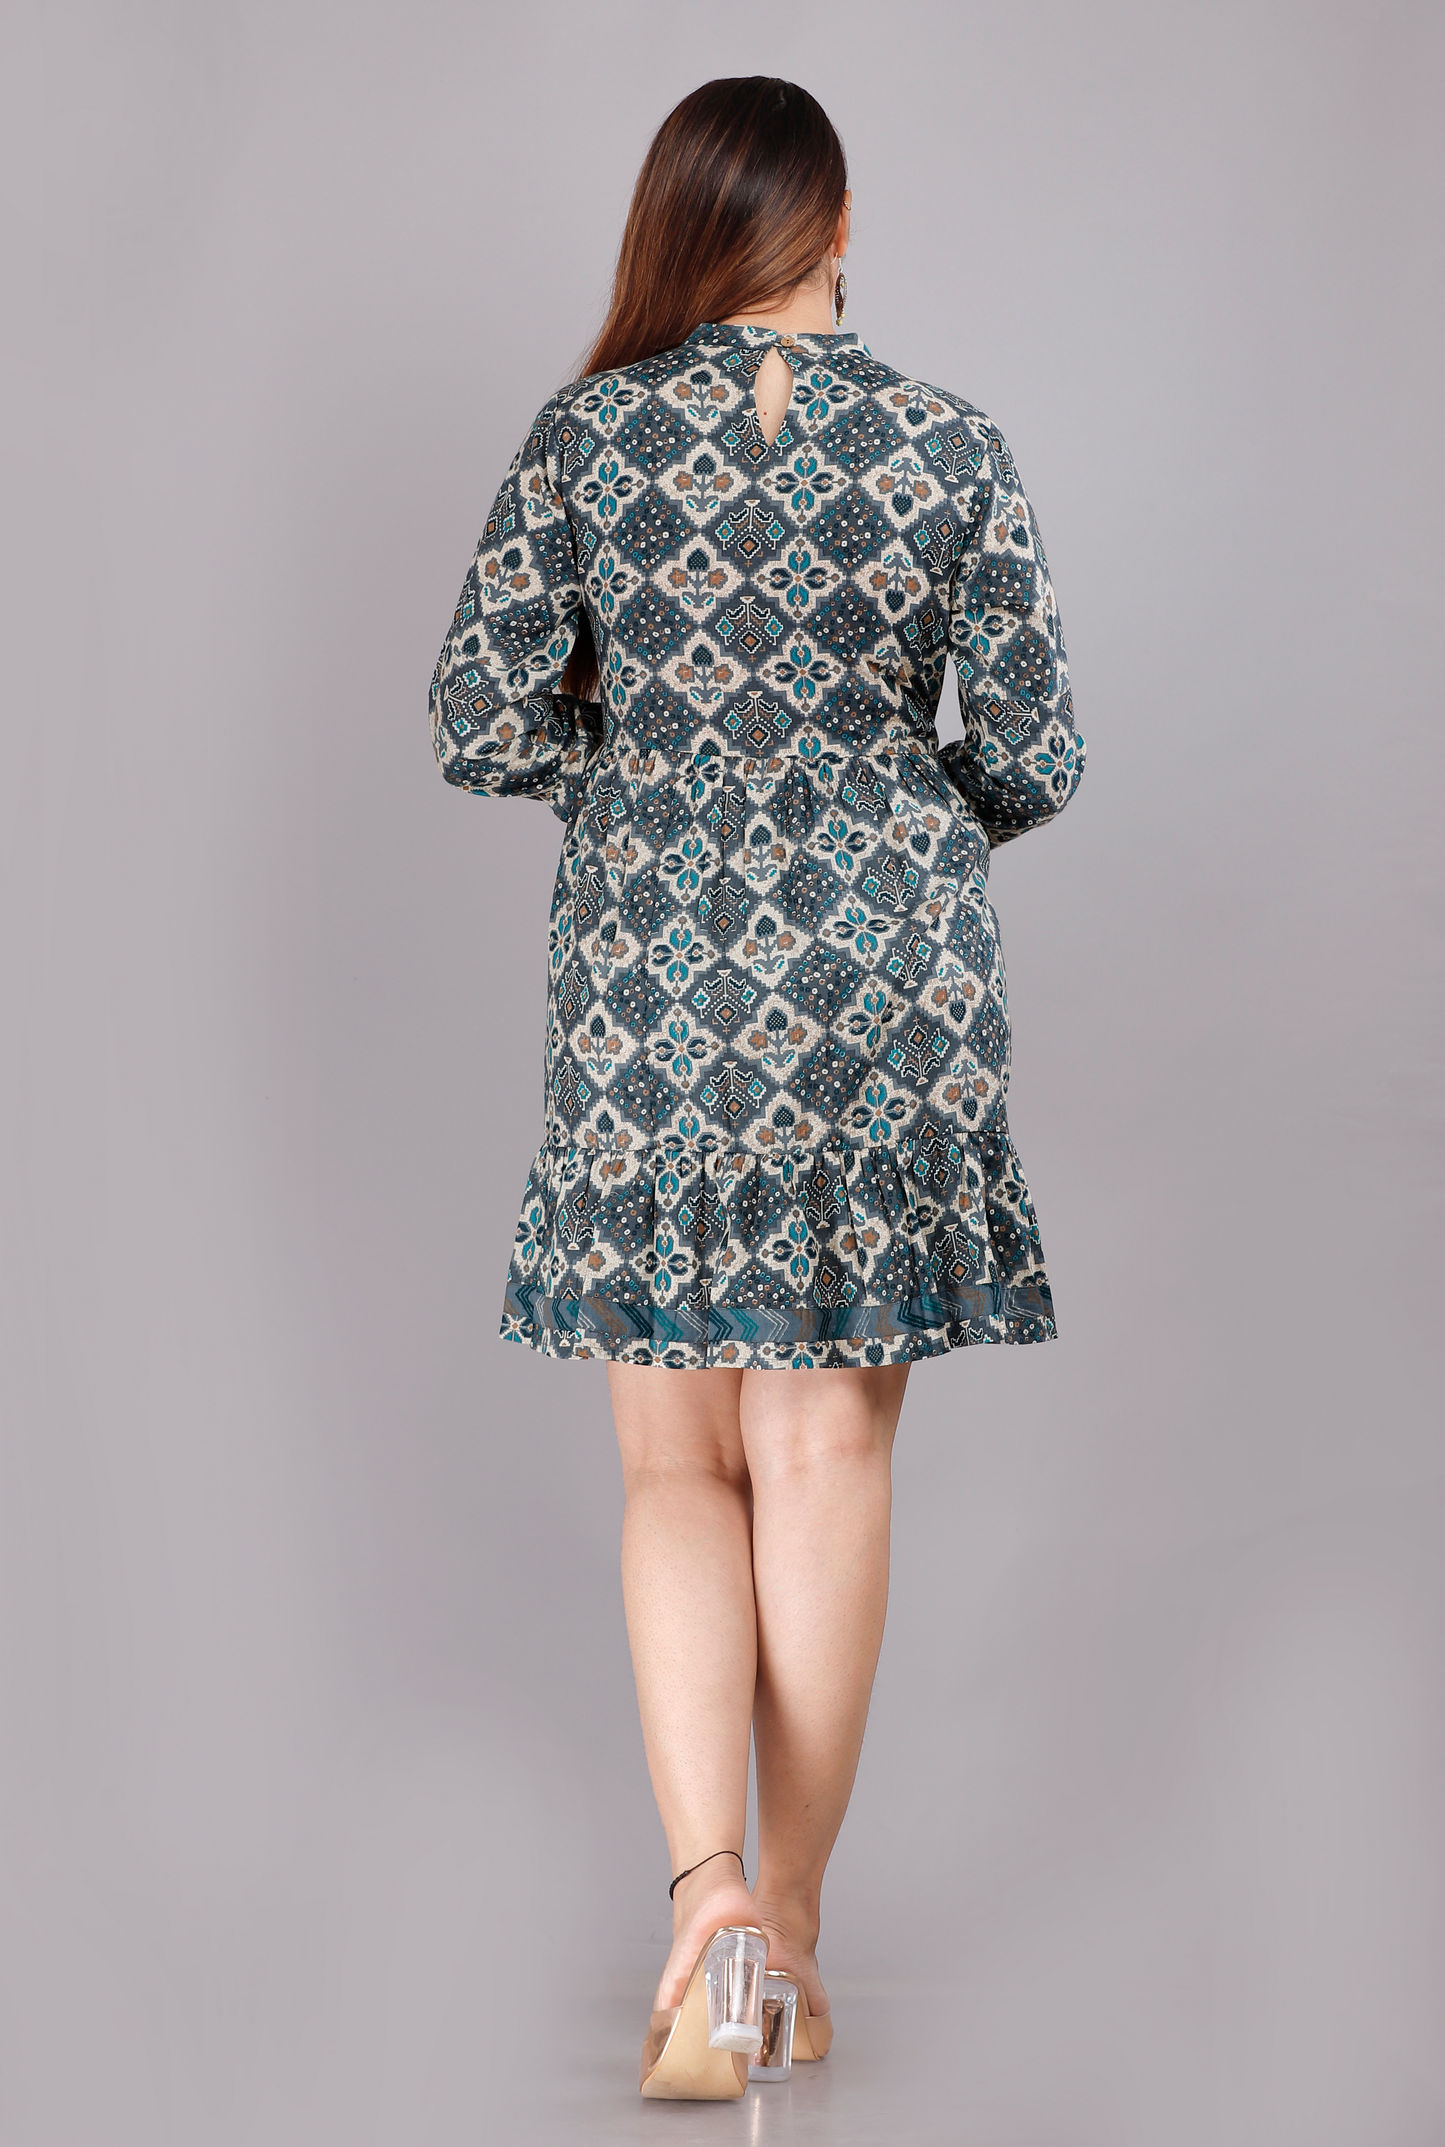 Cotton Turquoise Short Kurti Dress with Full Sleeves